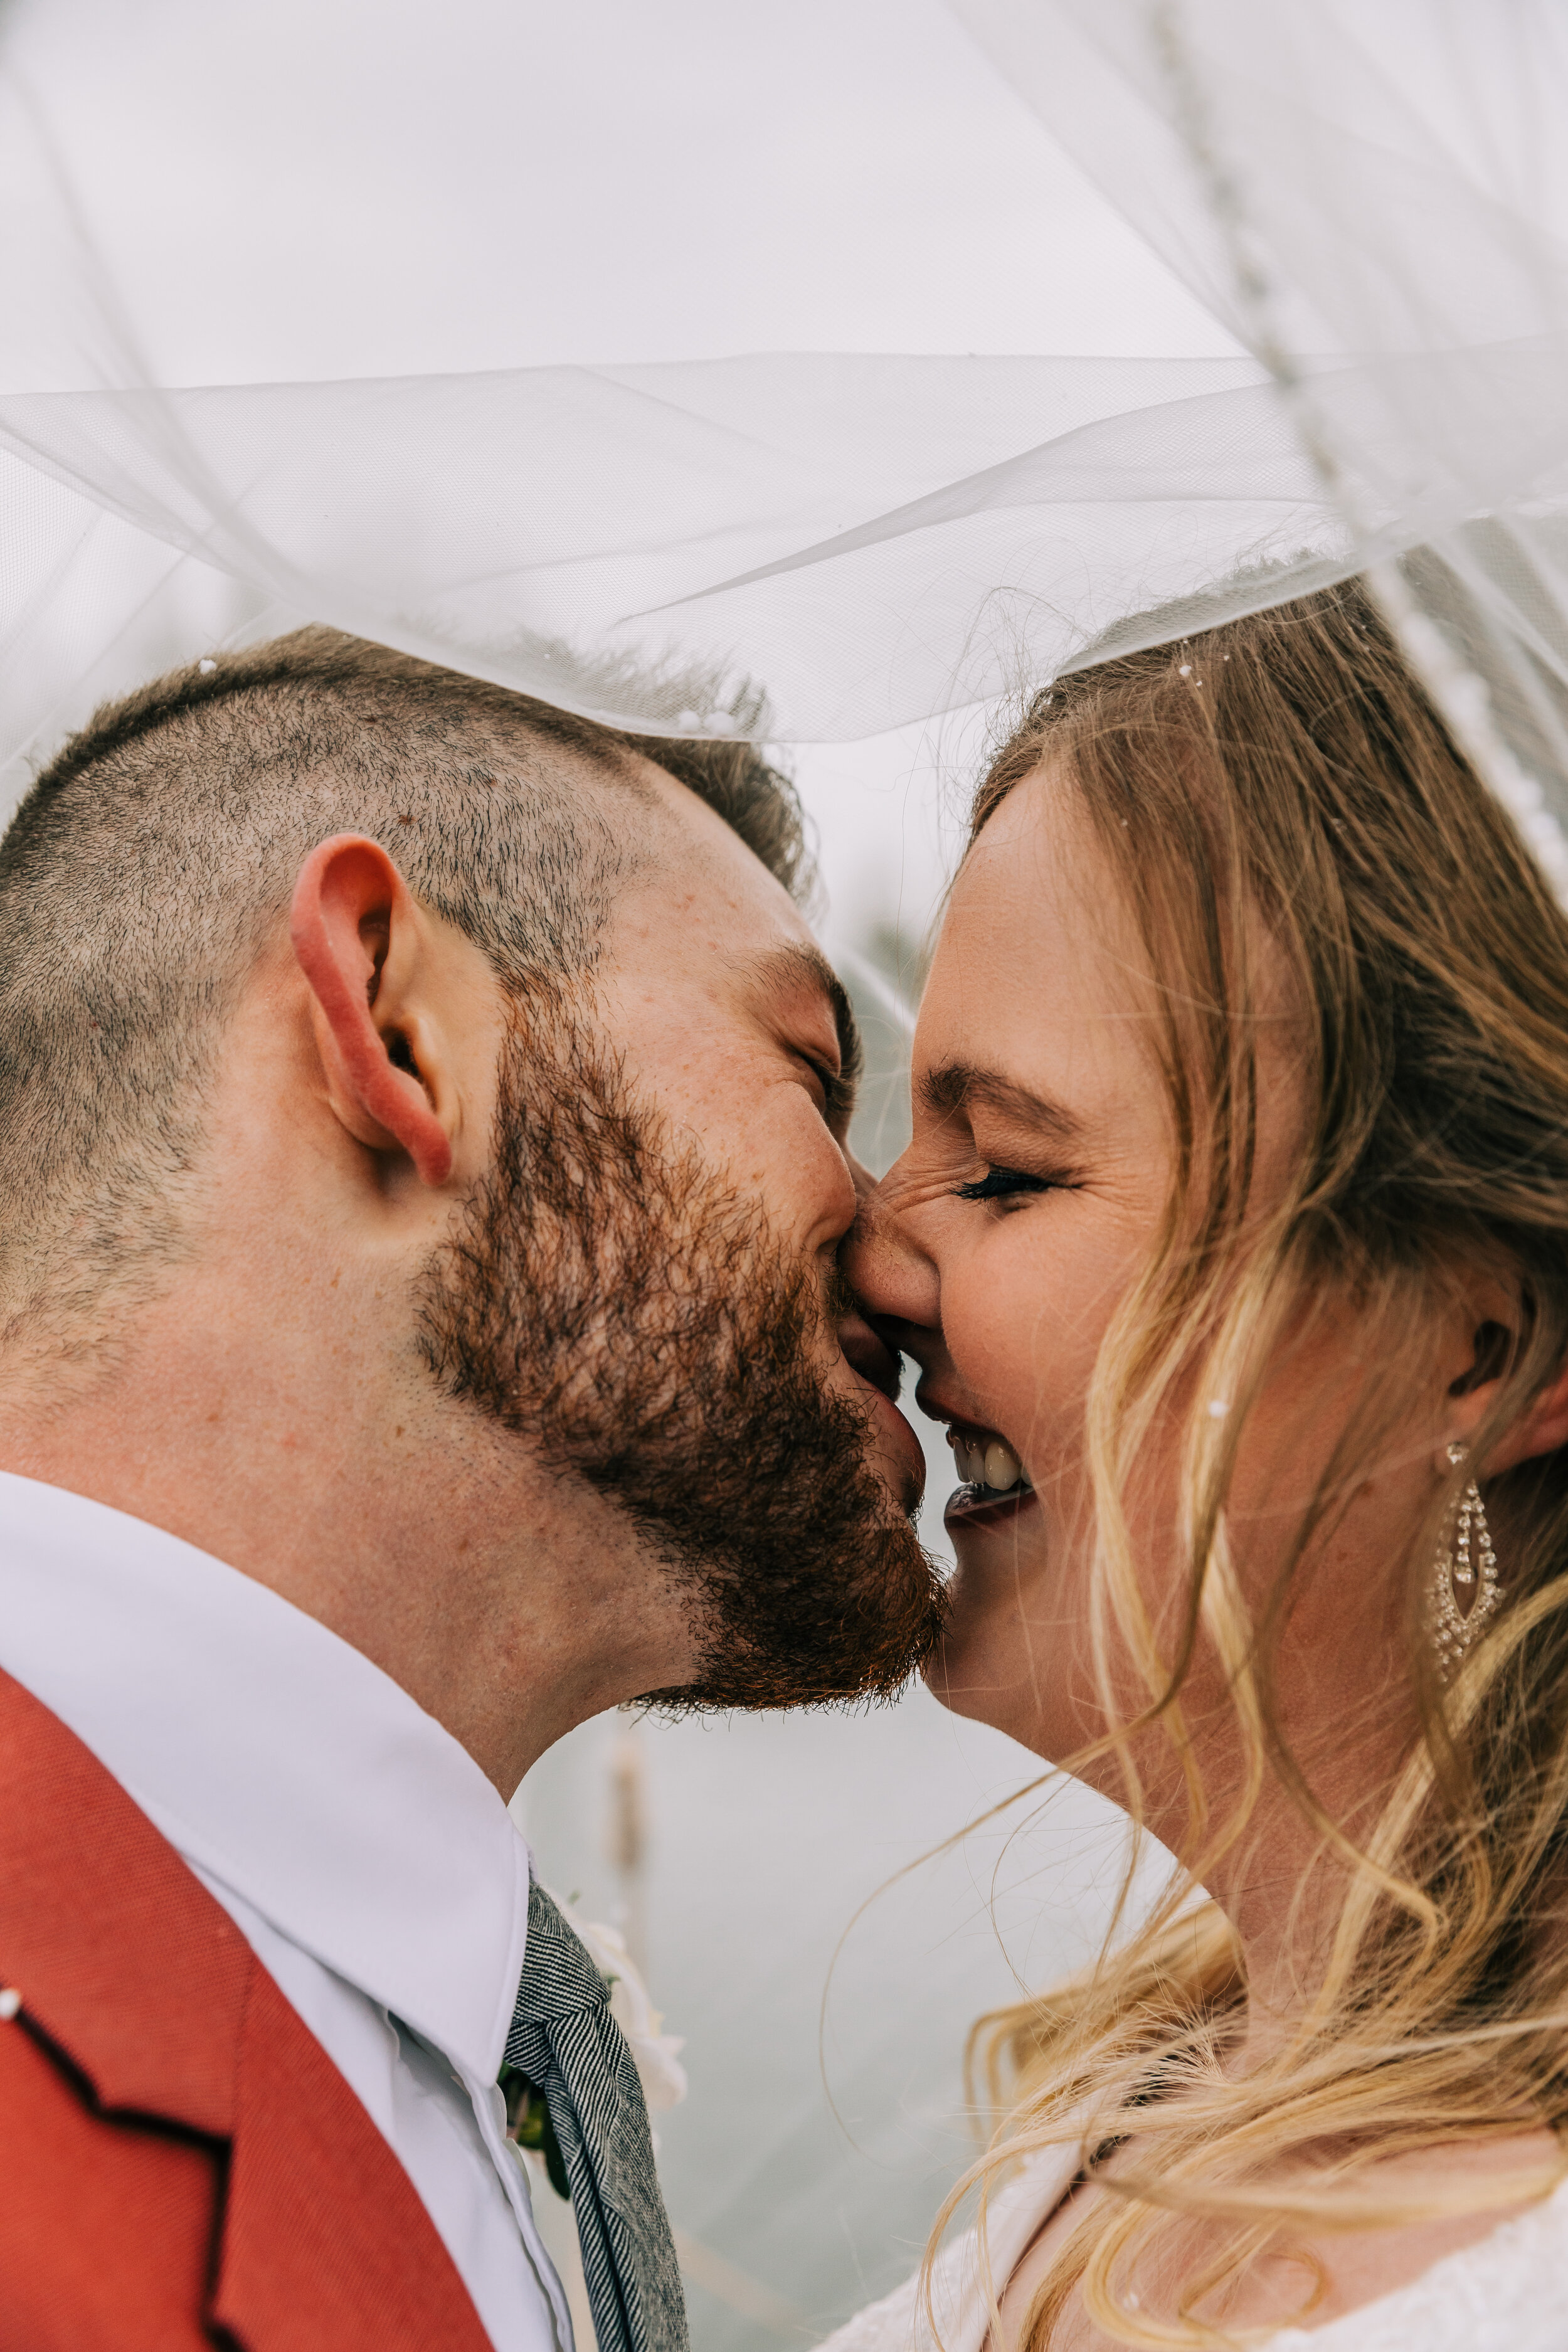  A kiss underneath the veil in a beautiful stormy elopement styled photo shoot by Bella Alder Photography. Elopement picture goals couple goals wedding goals life goals professional Utah photographer elopement photographer wedding photographer Presto